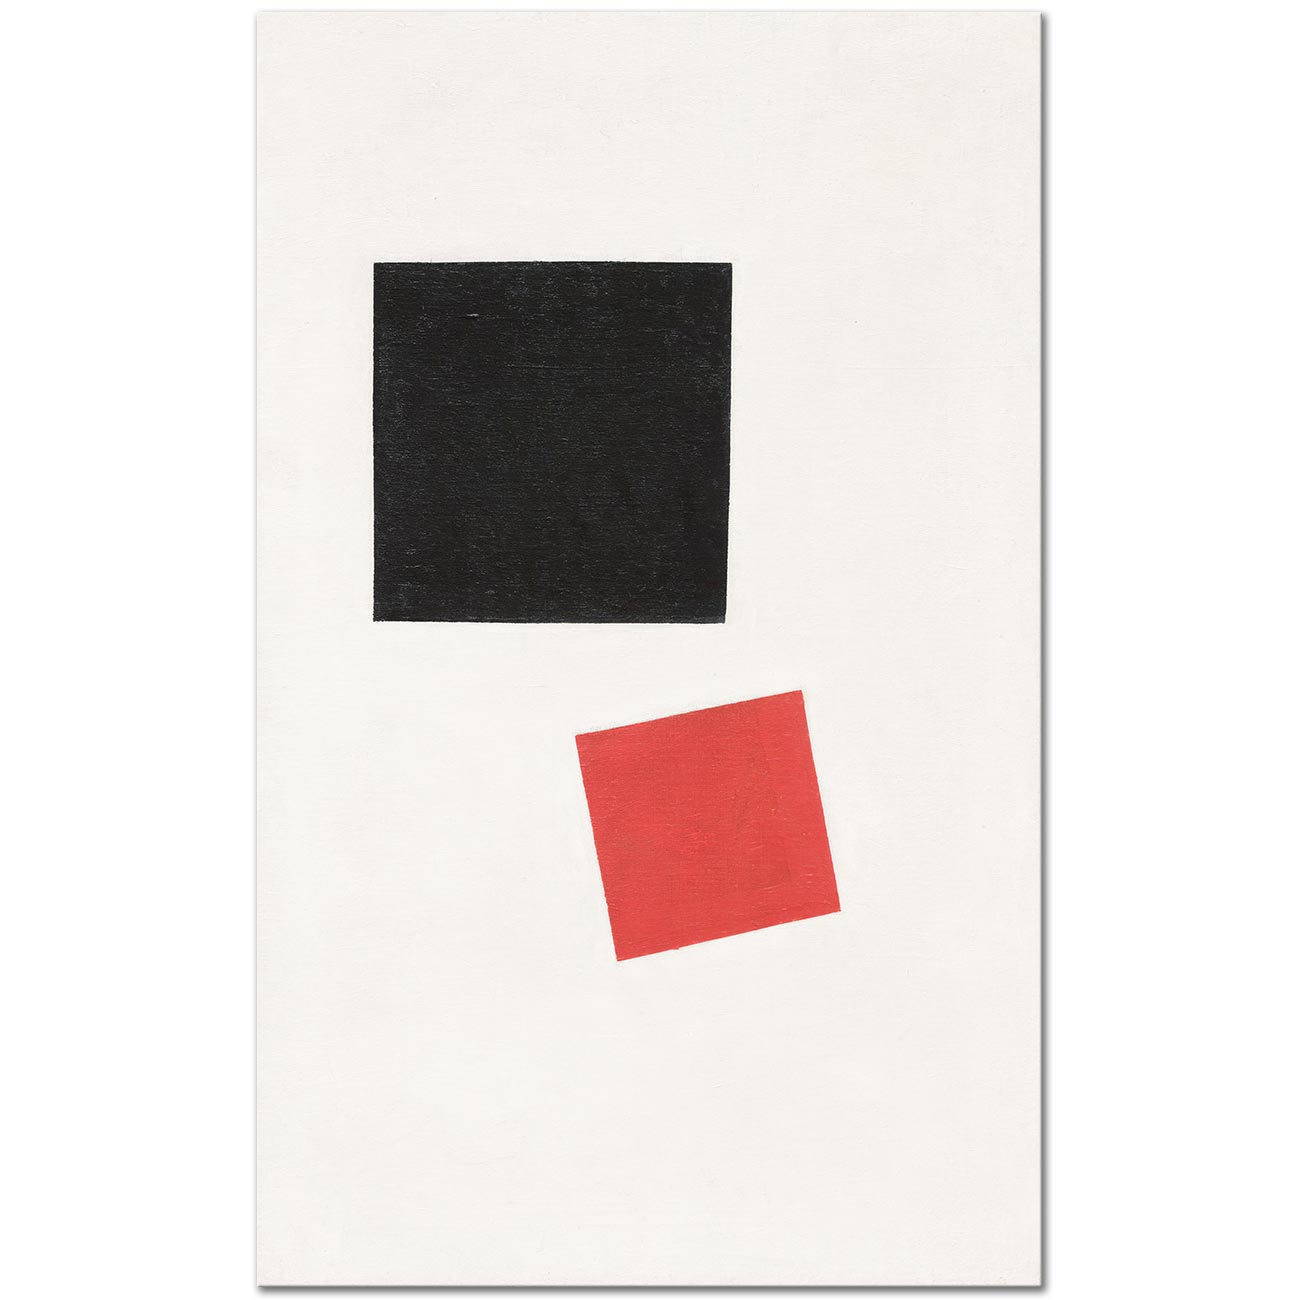 Kazimir Malevich Black Square And Red Square Art Print | CANVASTAR ®